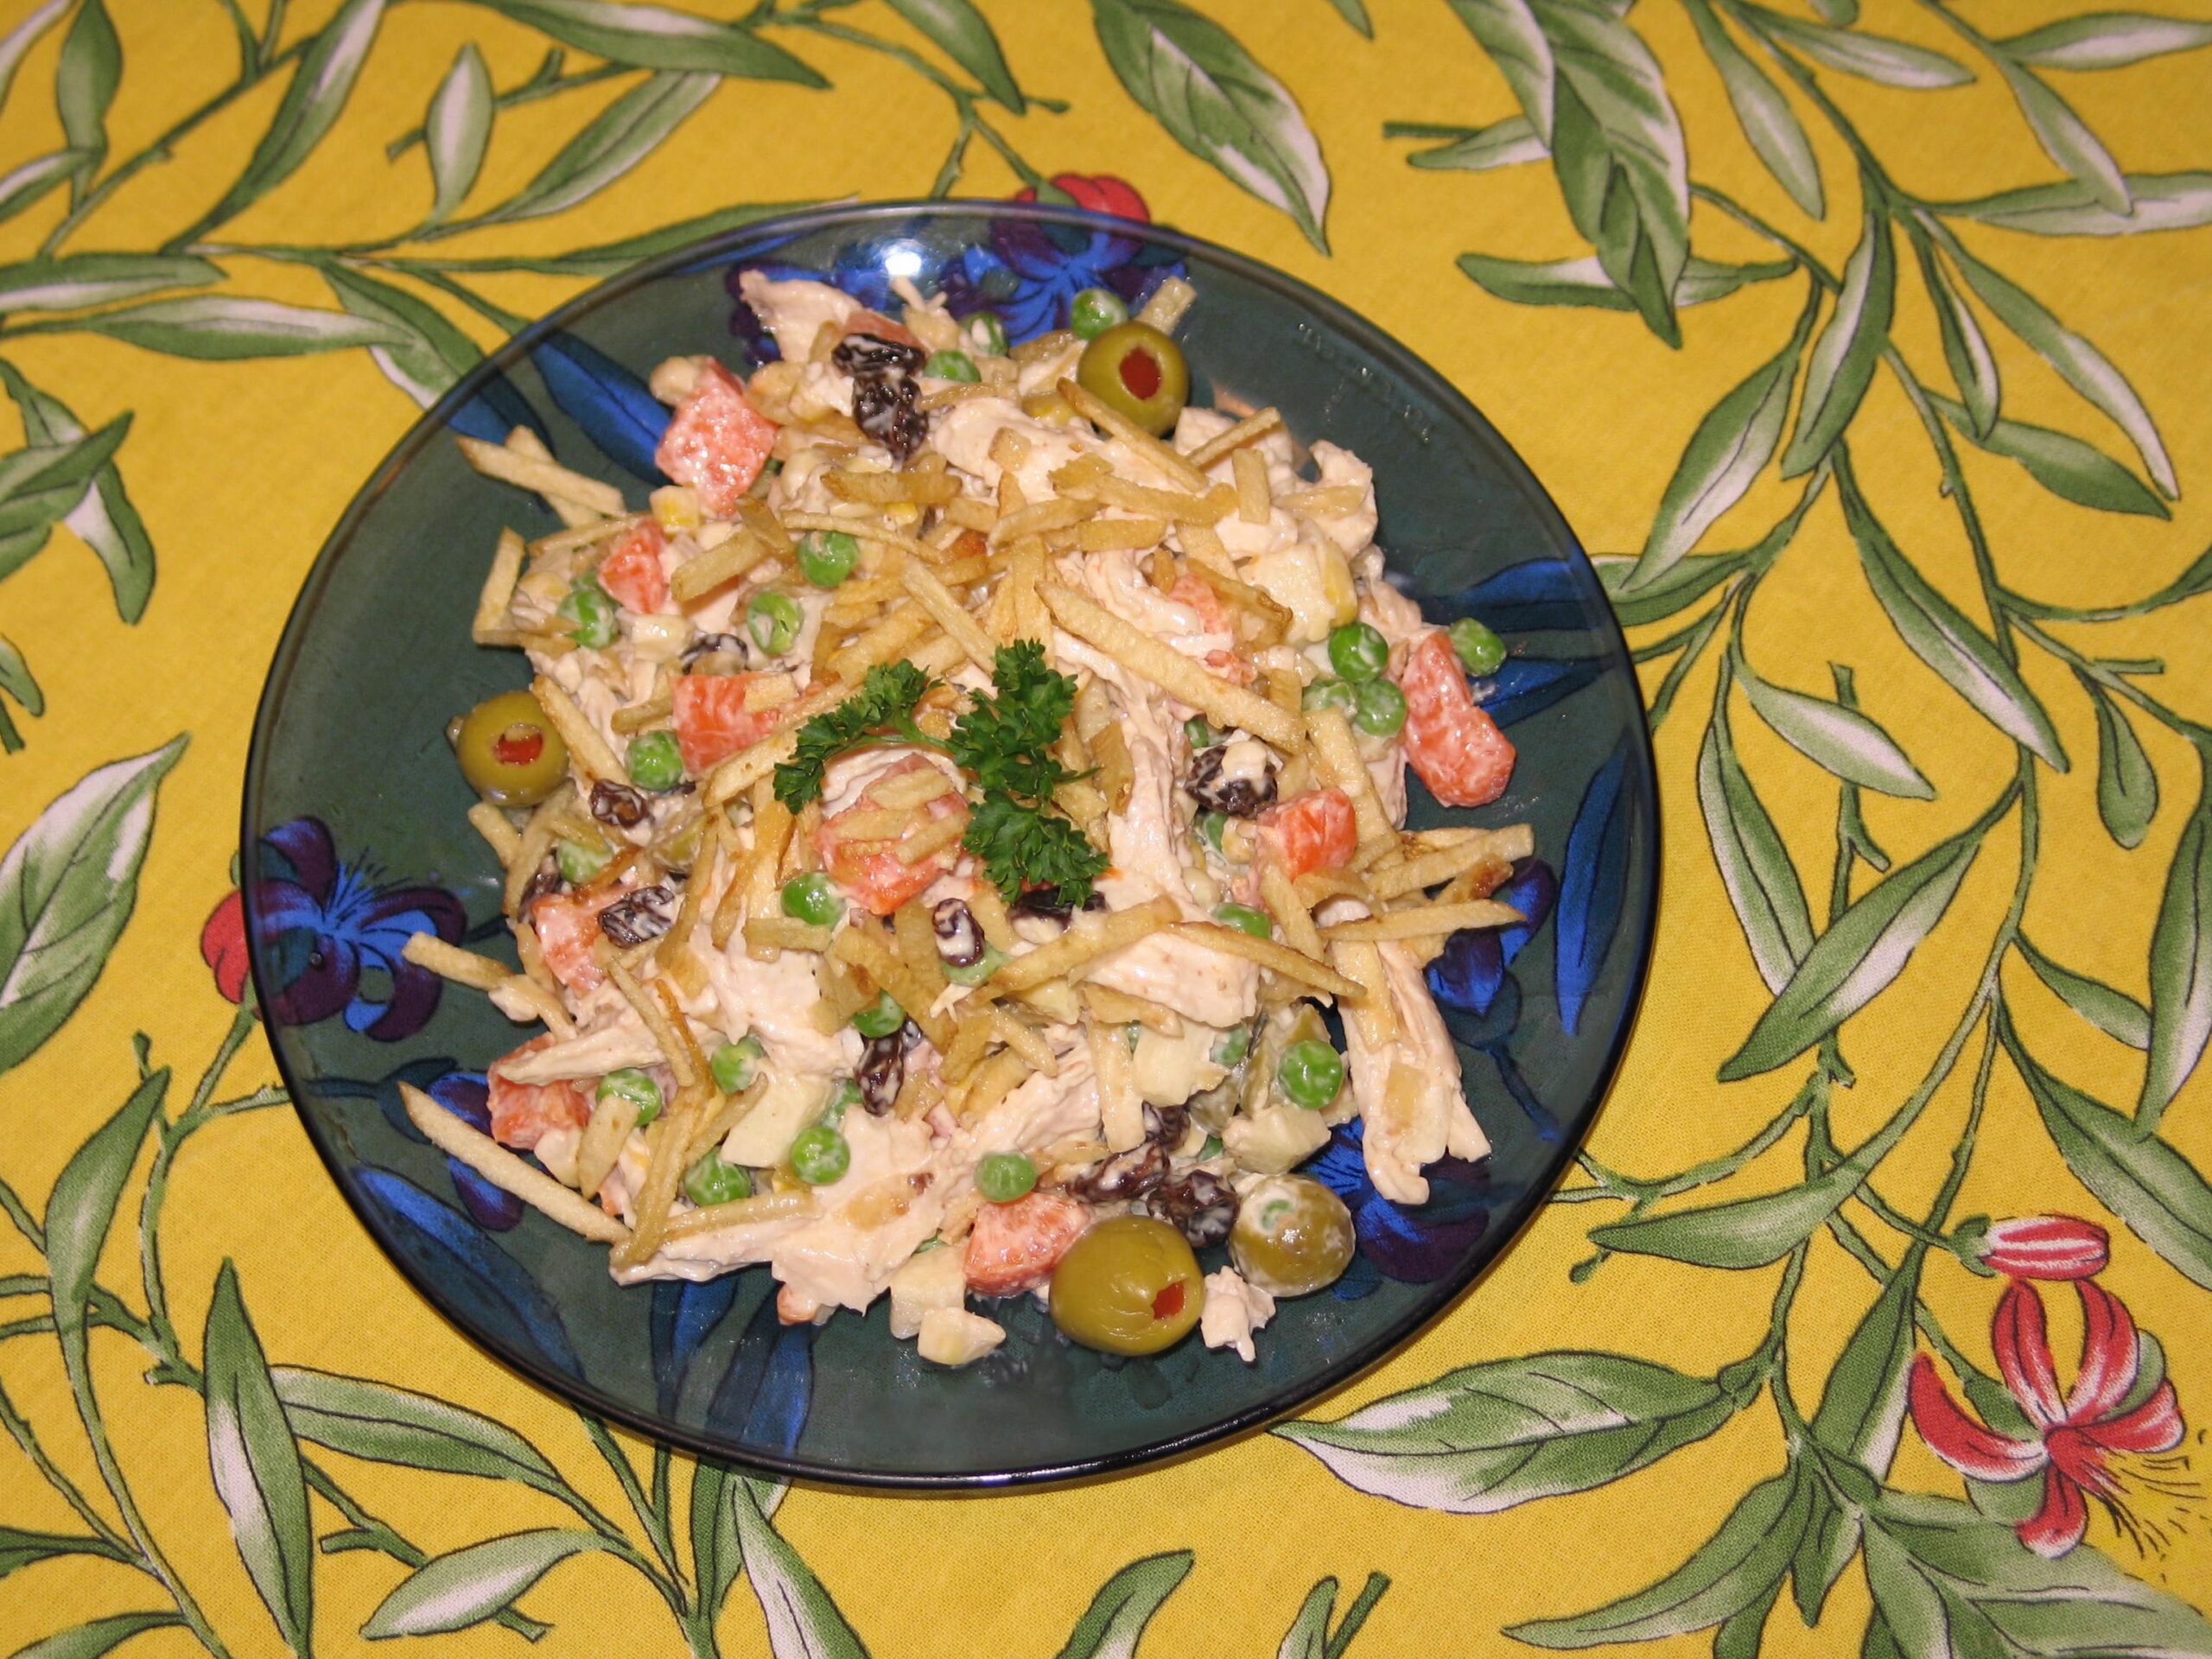  Bite into this delicious and colorful Brazilian chicken salad